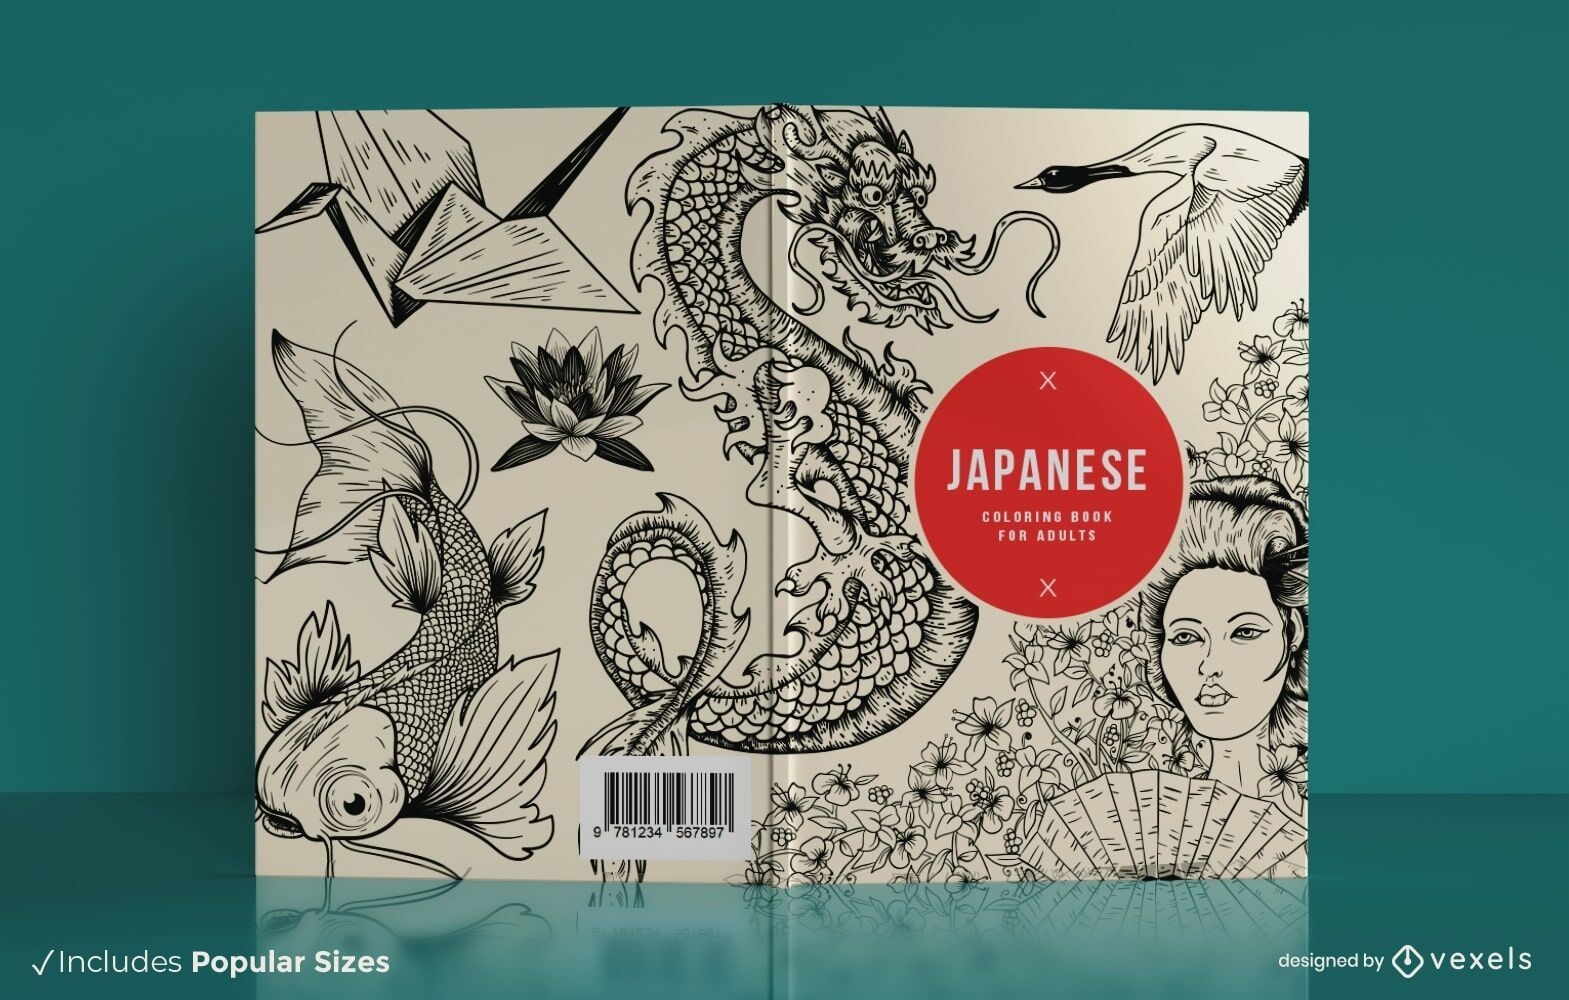 Japanese Book Covers - 23+ Best Japanese Book Cover Ideas